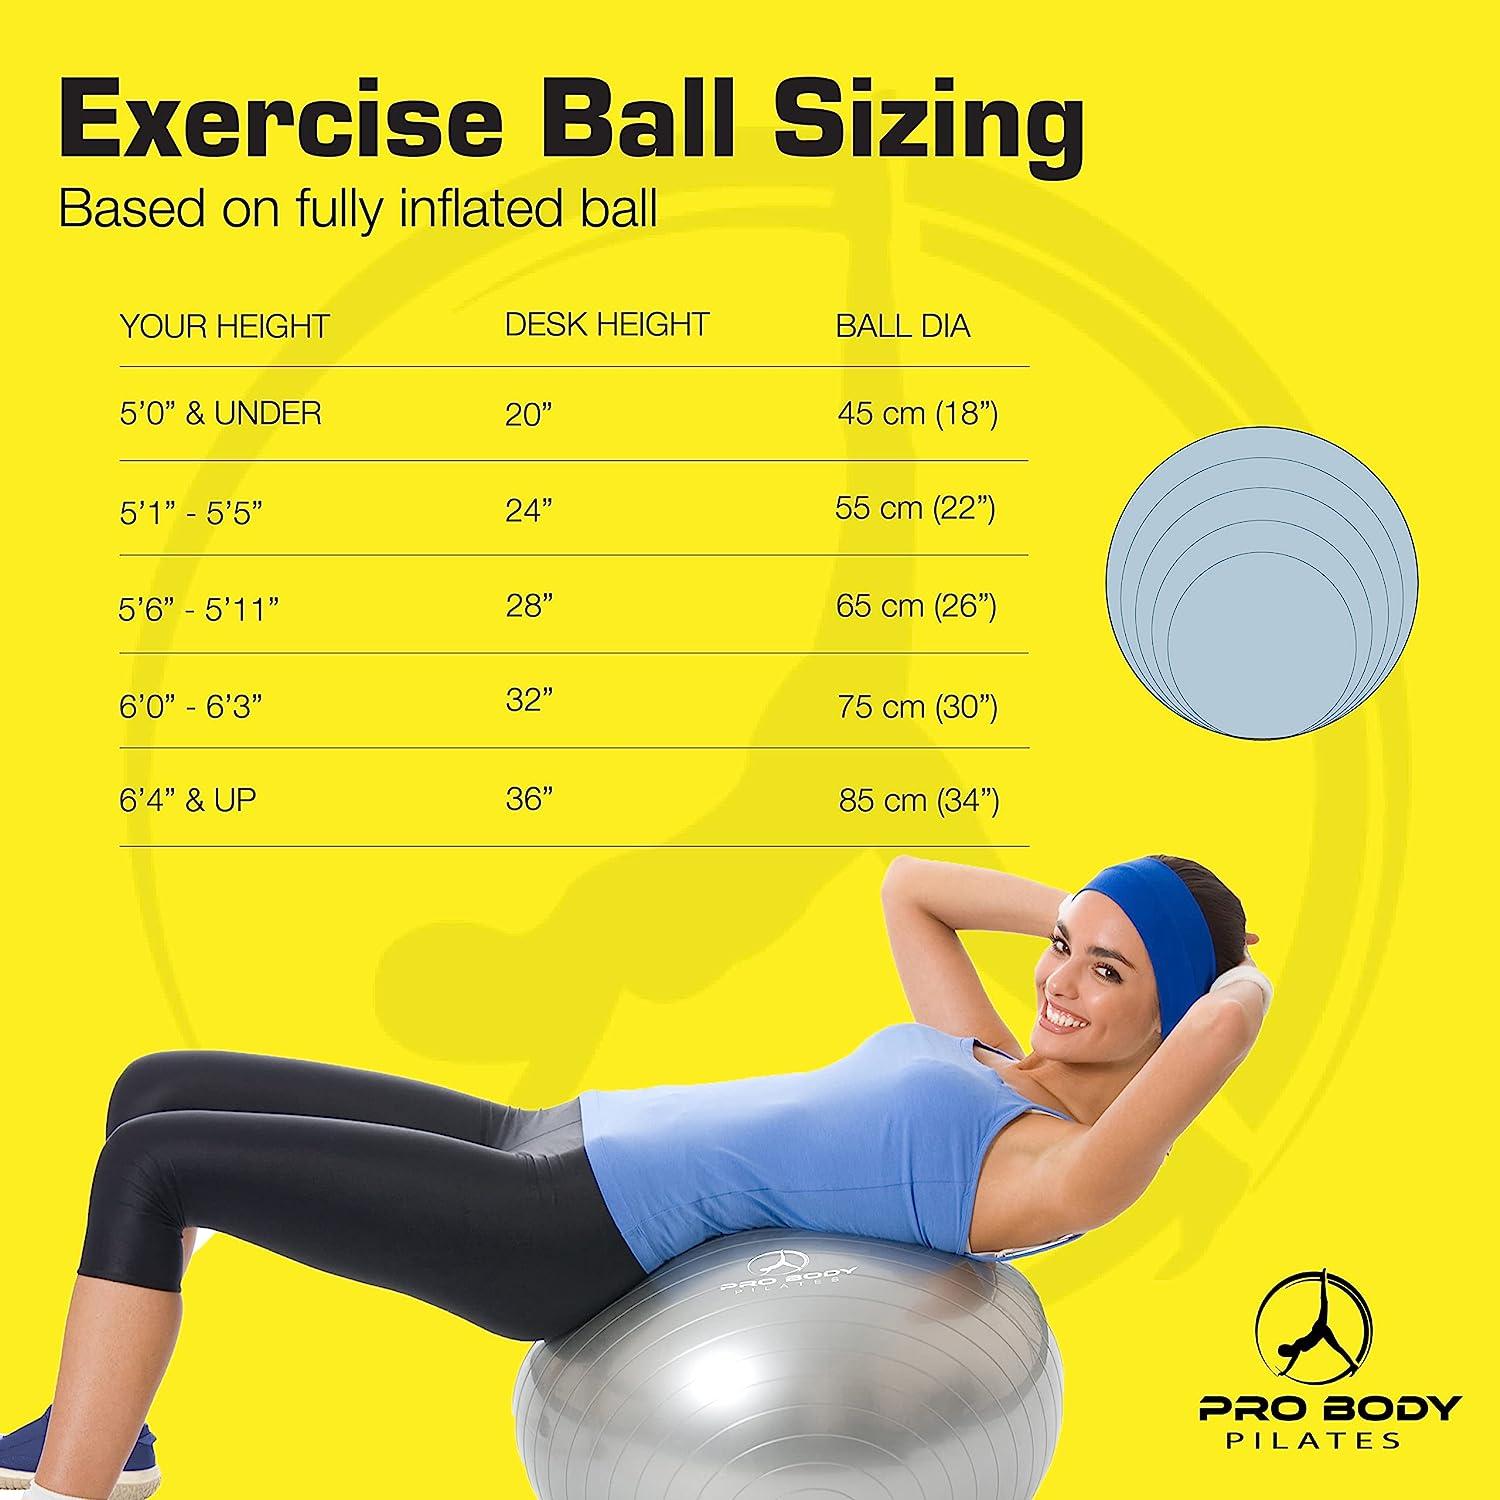 Yoga Ball Size Chart for Exercise and Stability